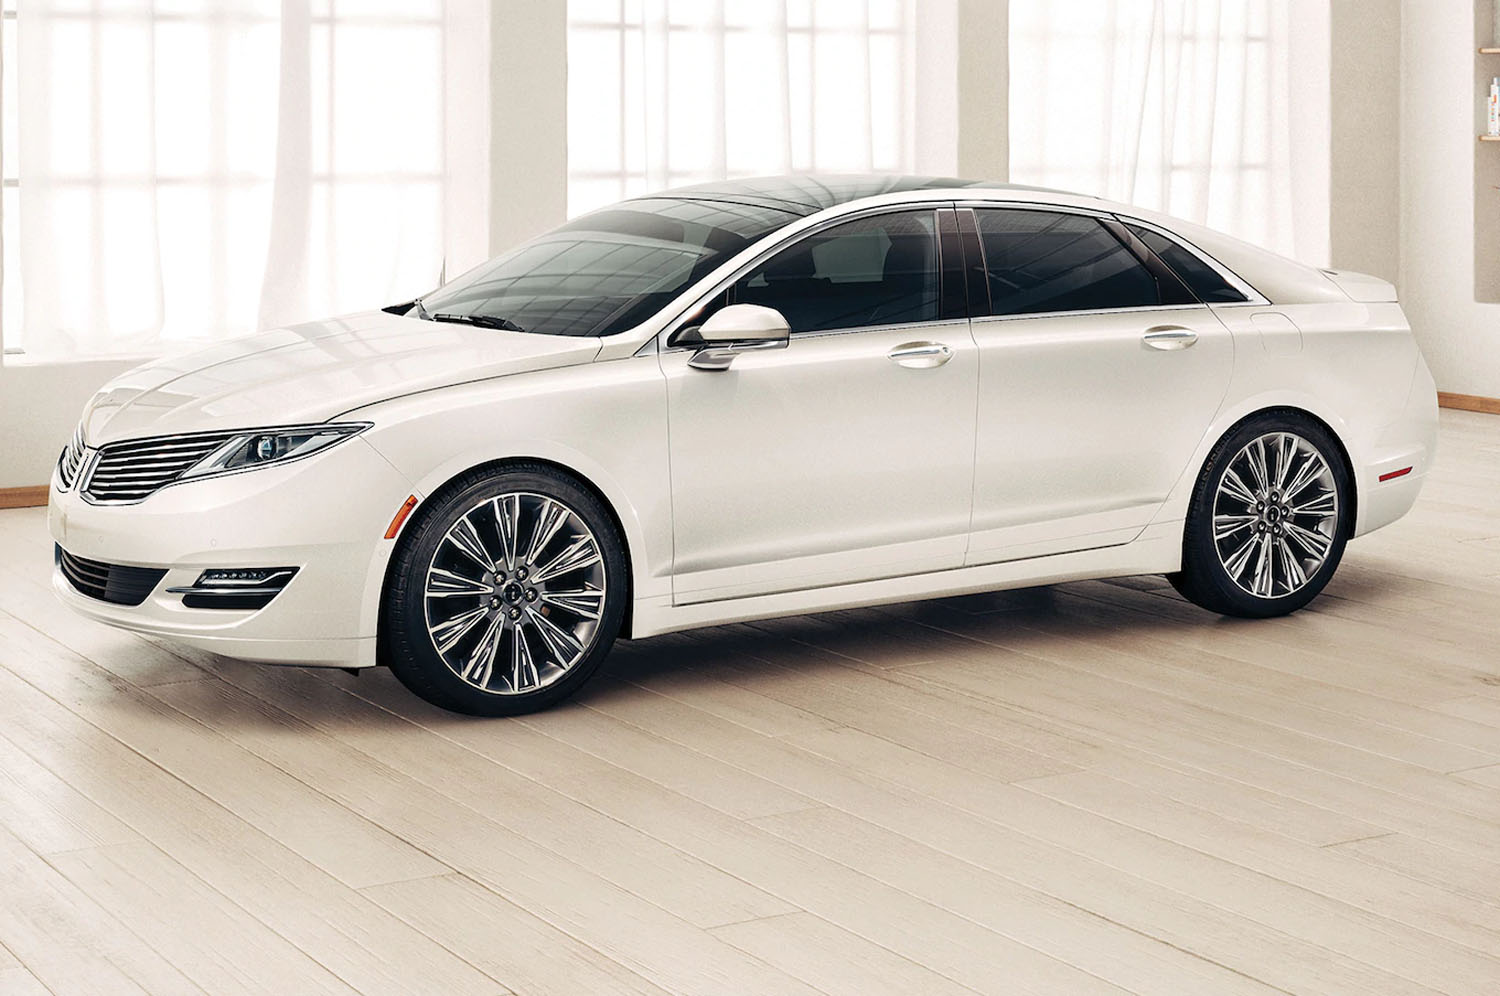 2015 Lincoln MKZ Among 2021's Fastest Depreciating Cars